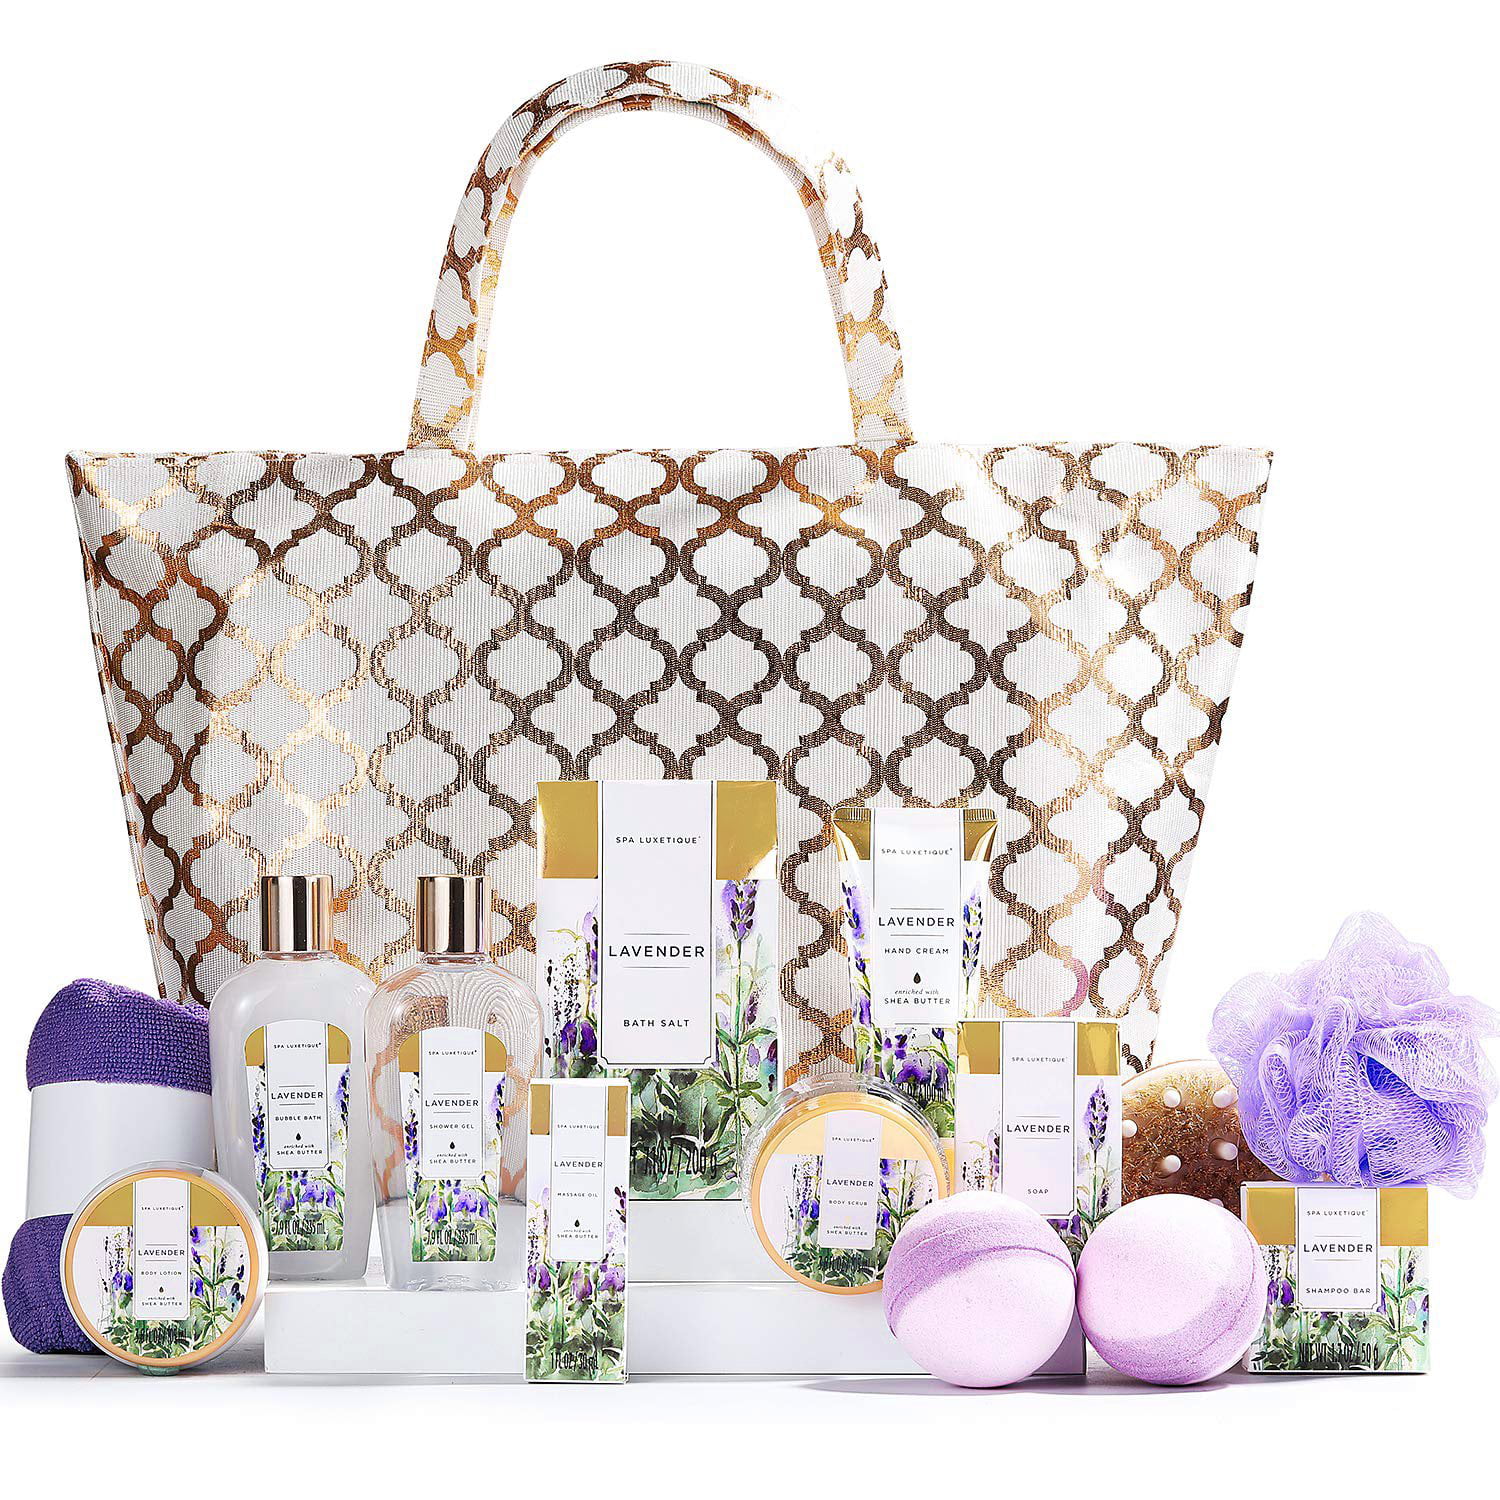 Spa Bath Gift Set for Women 15 Pcs Lavender Spa Baskets Gift Bag - Relaxing Holiday Birthday Bath and Body Gifts